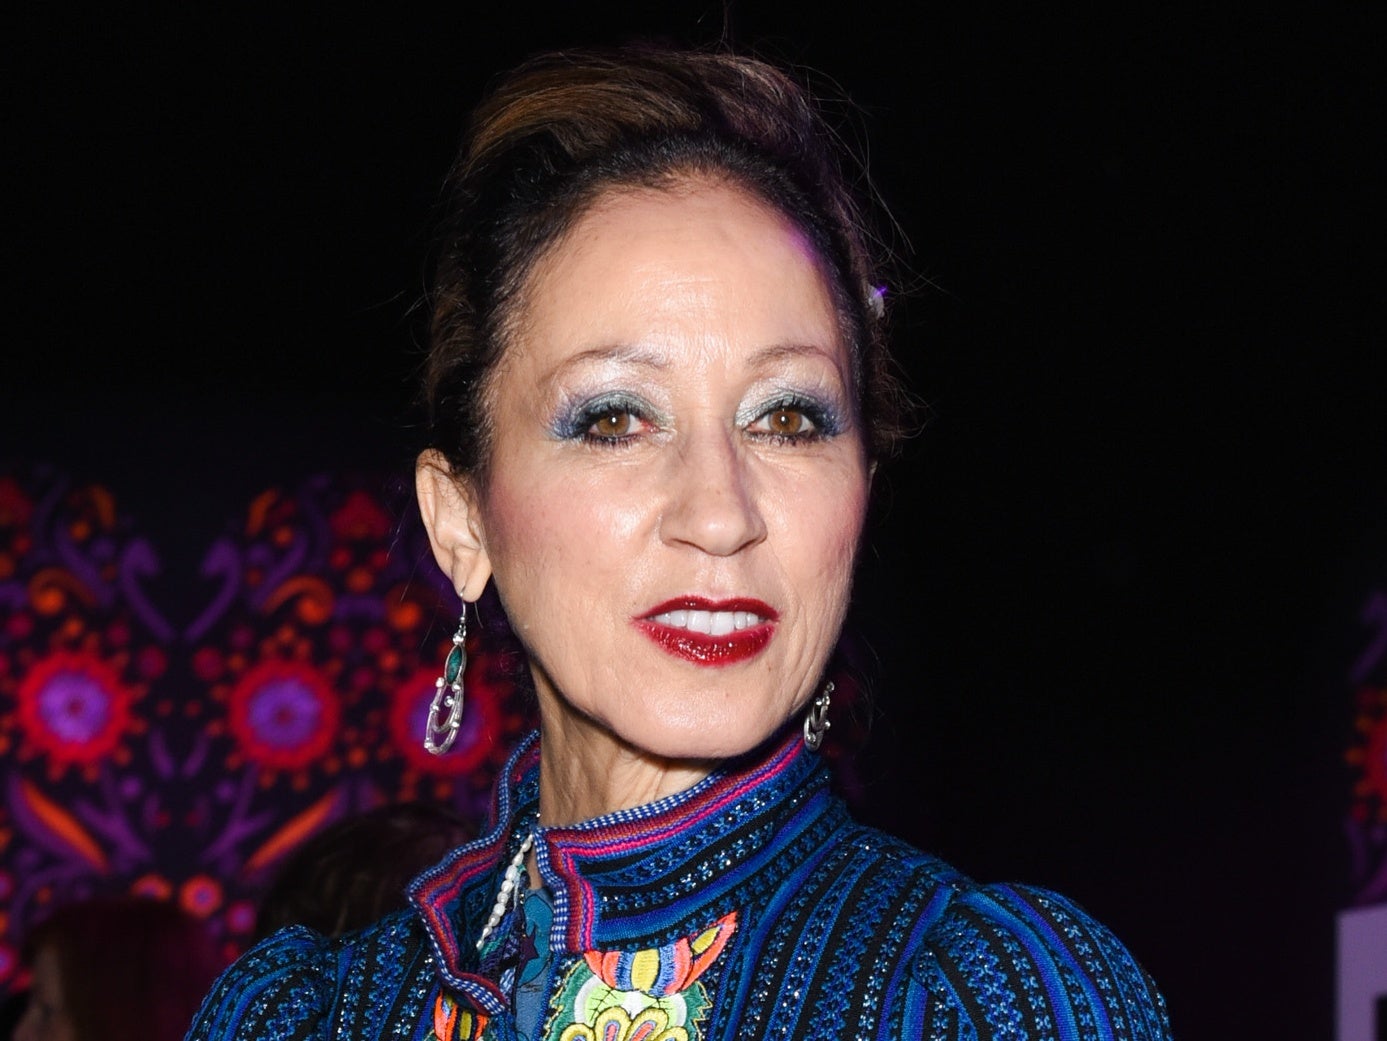 ESSENCE Best In Black Fashion Awards: Our 2019 Icon Award Honoree Is Pat Cleveland